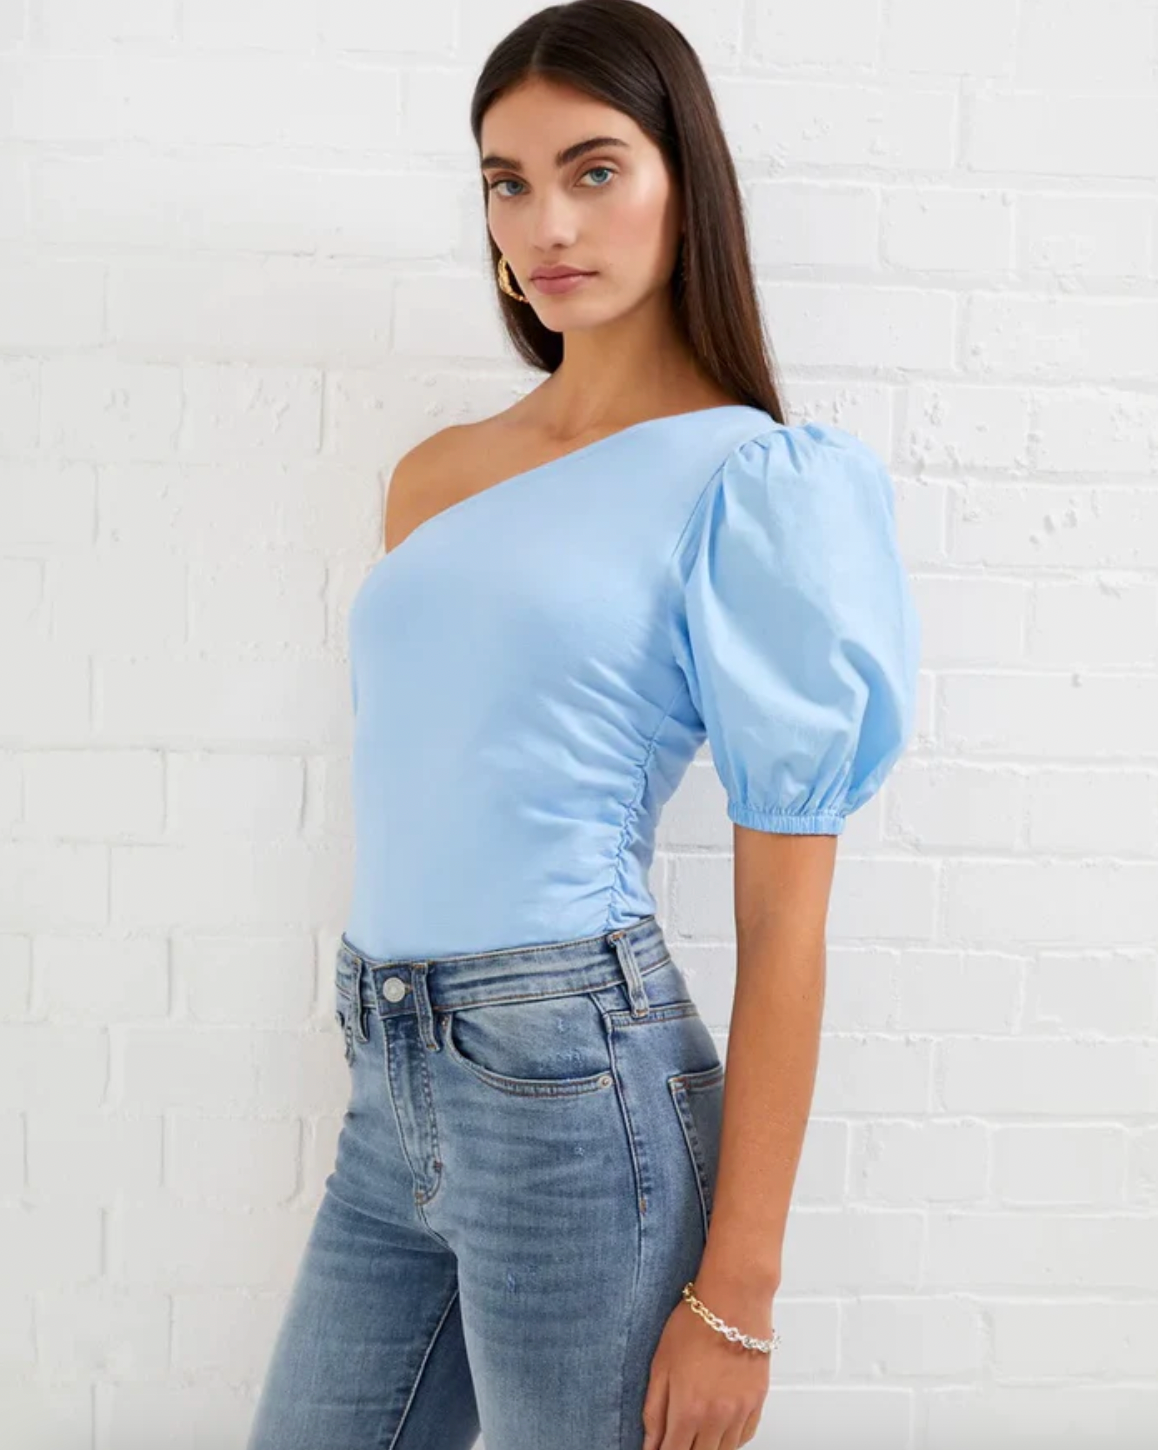 Model wearing French Connection Rosanna Cot mix 1 shoulder top in placid blue wearing jeans on a white brick background